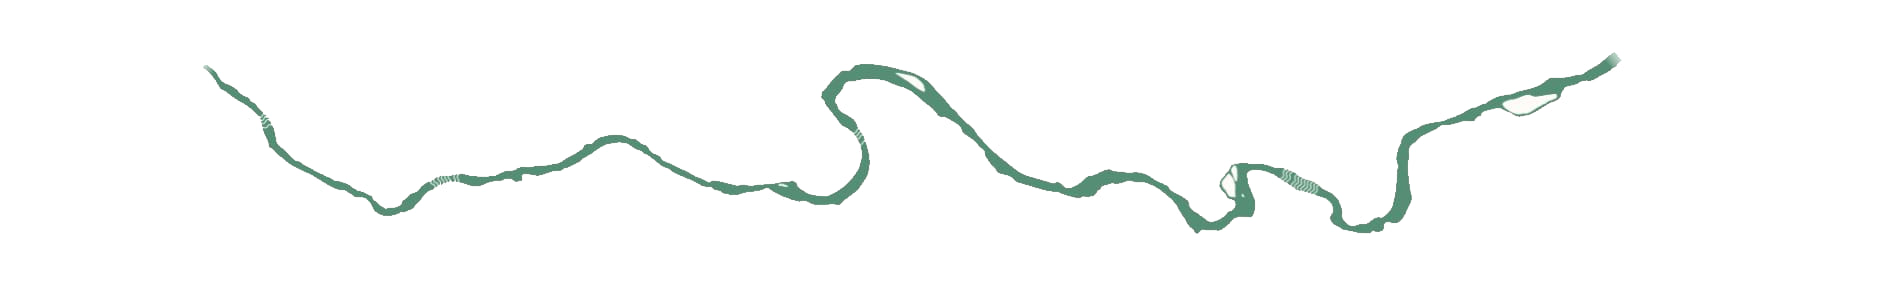 A green custom braided separator from the Caught in the Middle story